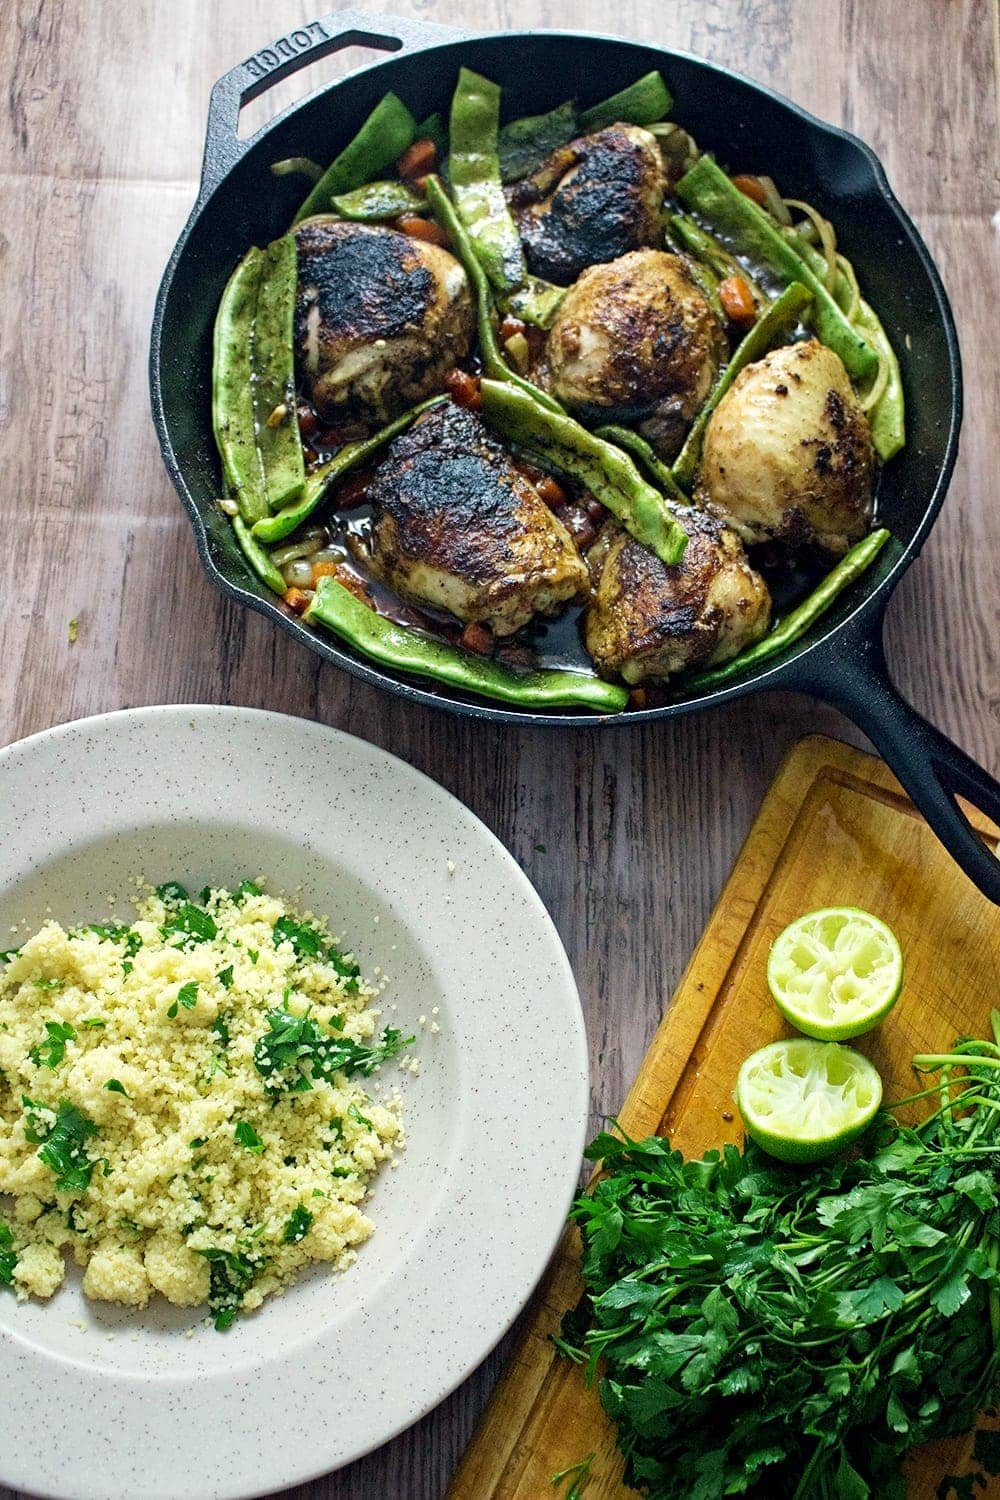 This berbere chicken recipe is bursting with flavour. It's quick and easy to put together and tastes amazing served over lime & parsley cous cous!